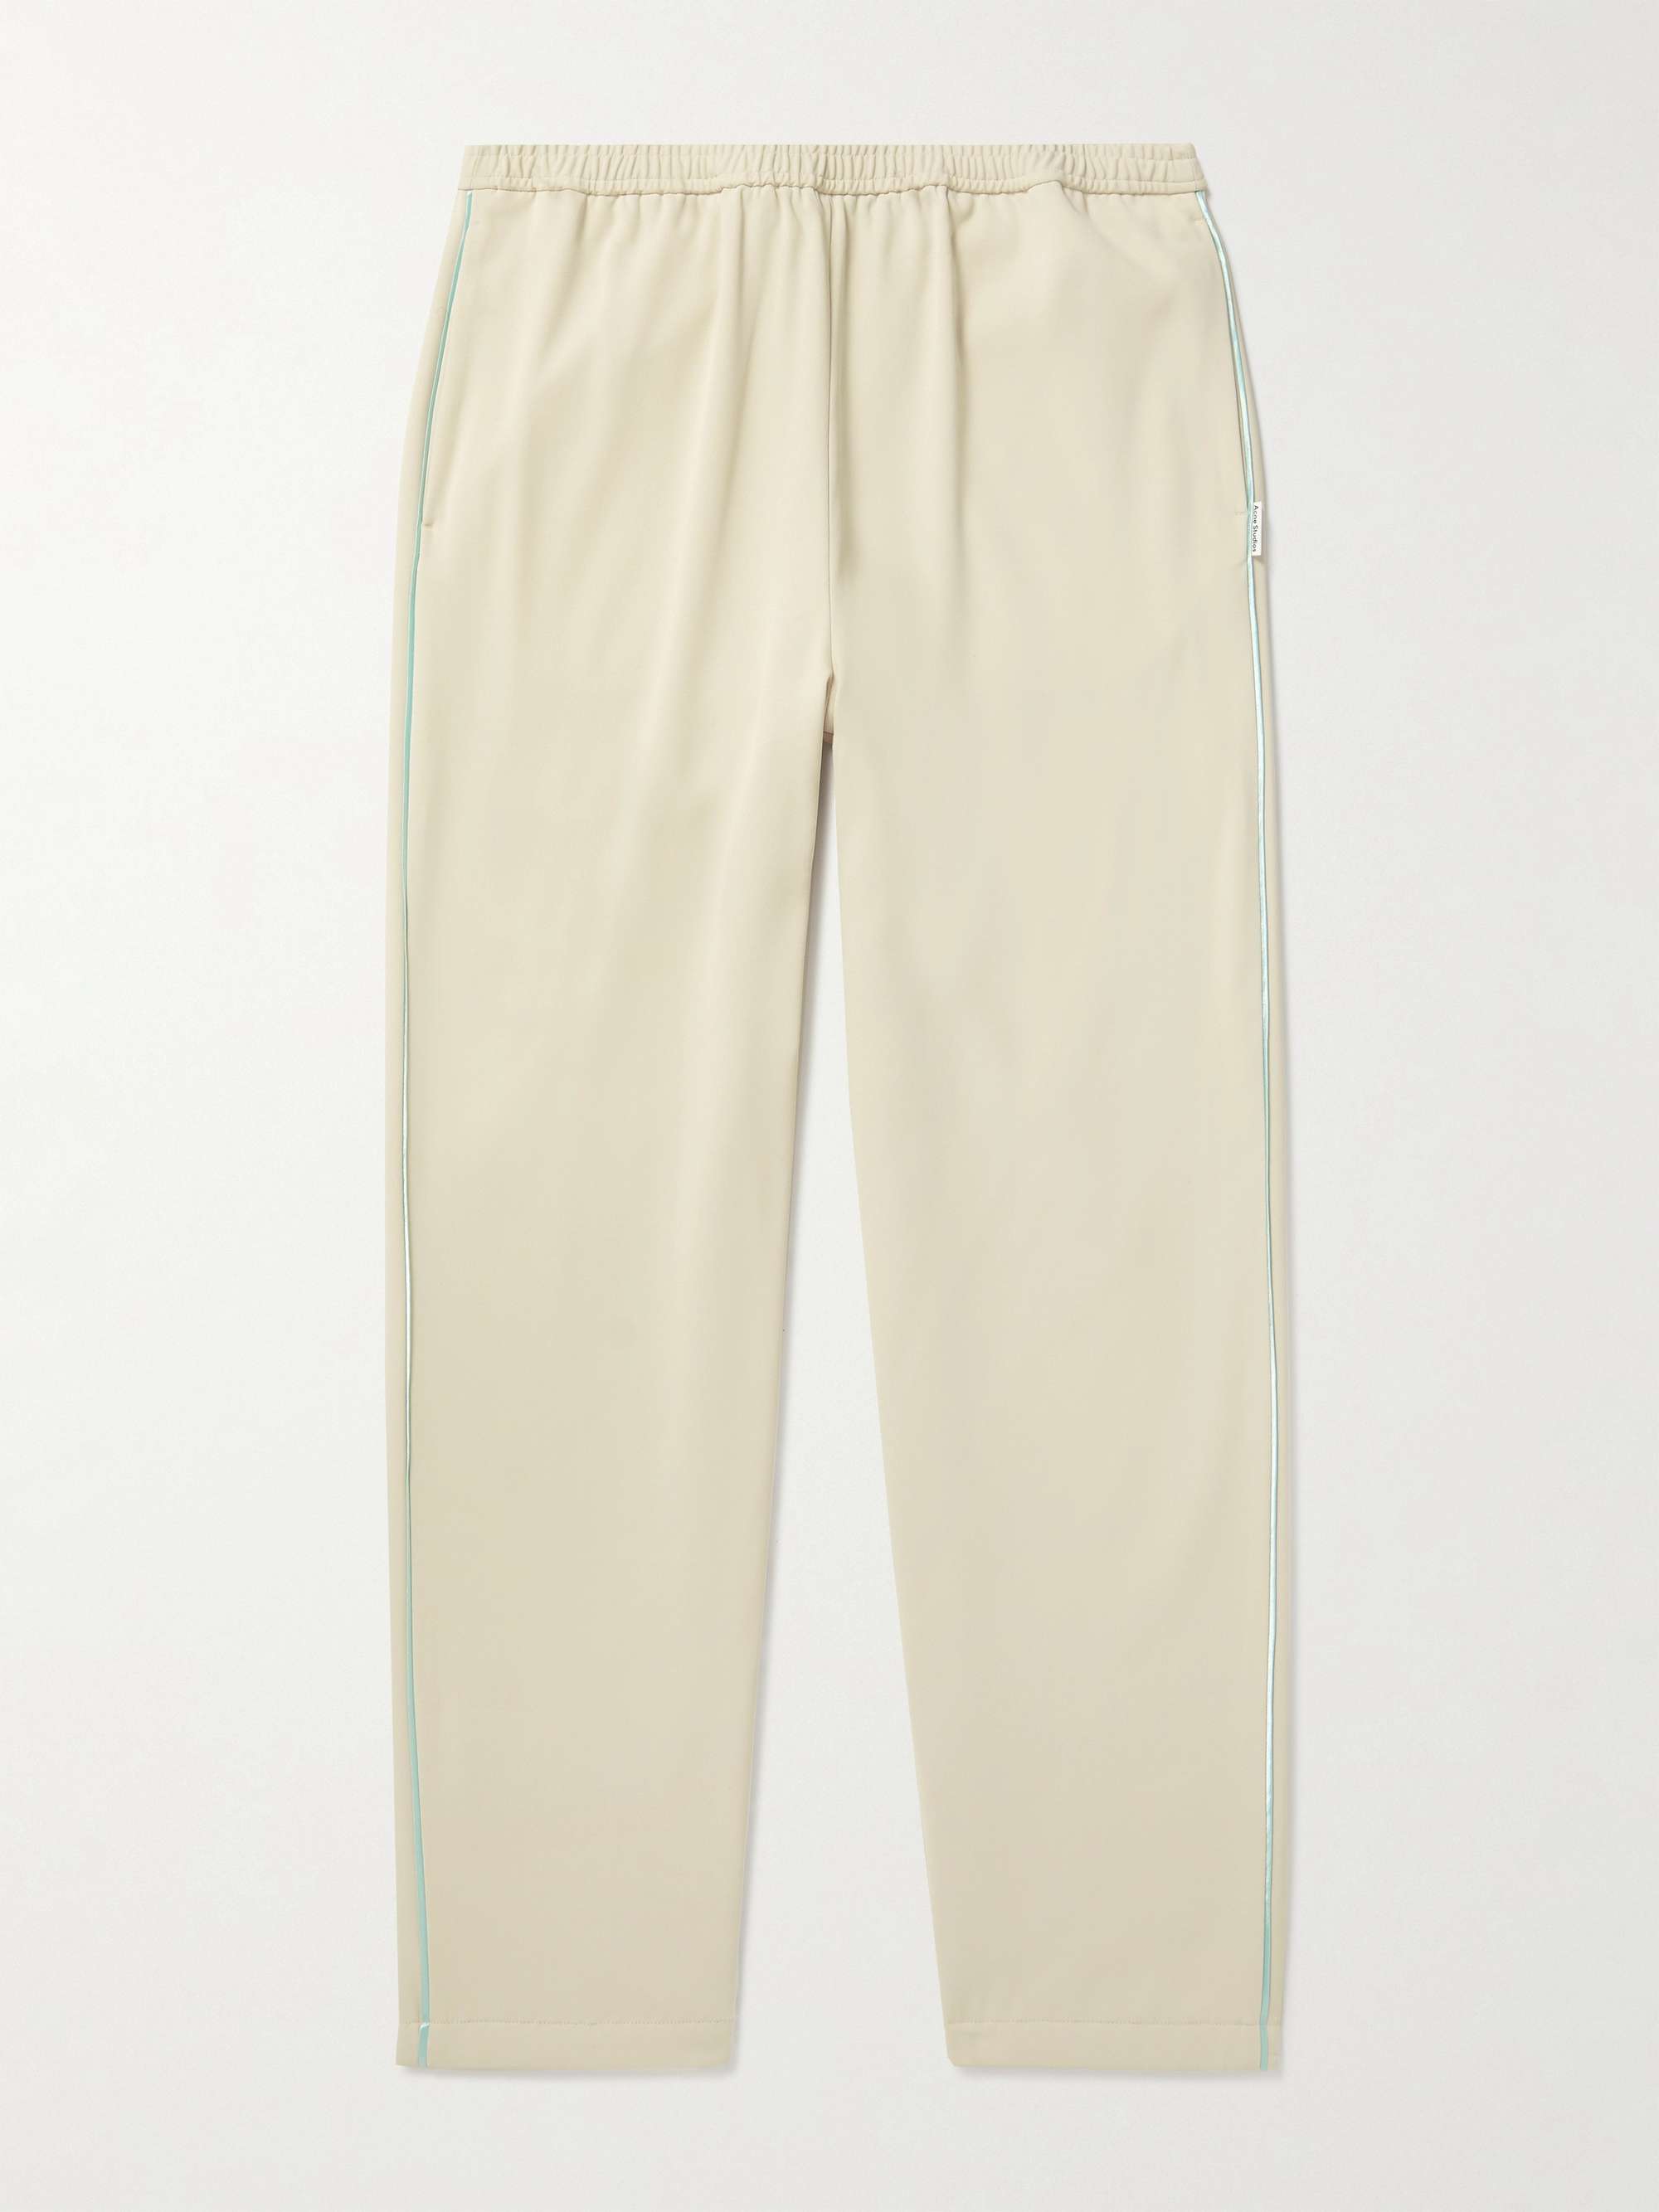 ACNE STUDIOS Tapered Satin-Trimmed Twill Drawstring Trousers